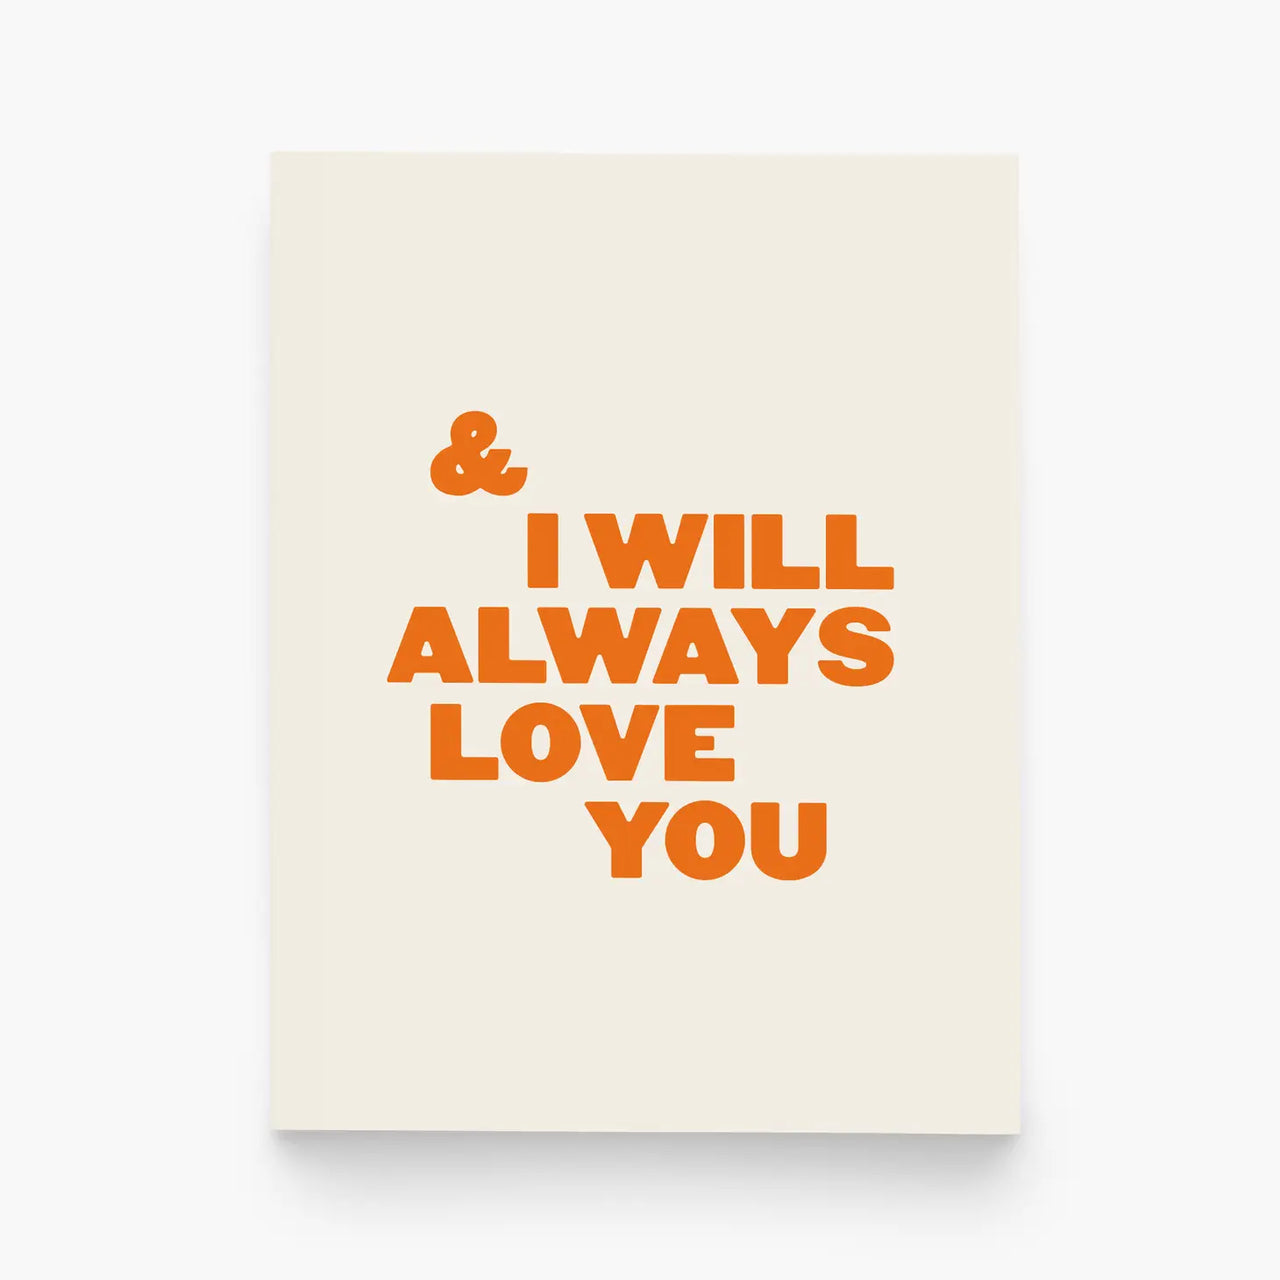 & I WILL ALWAYS LOVE YOU CARD